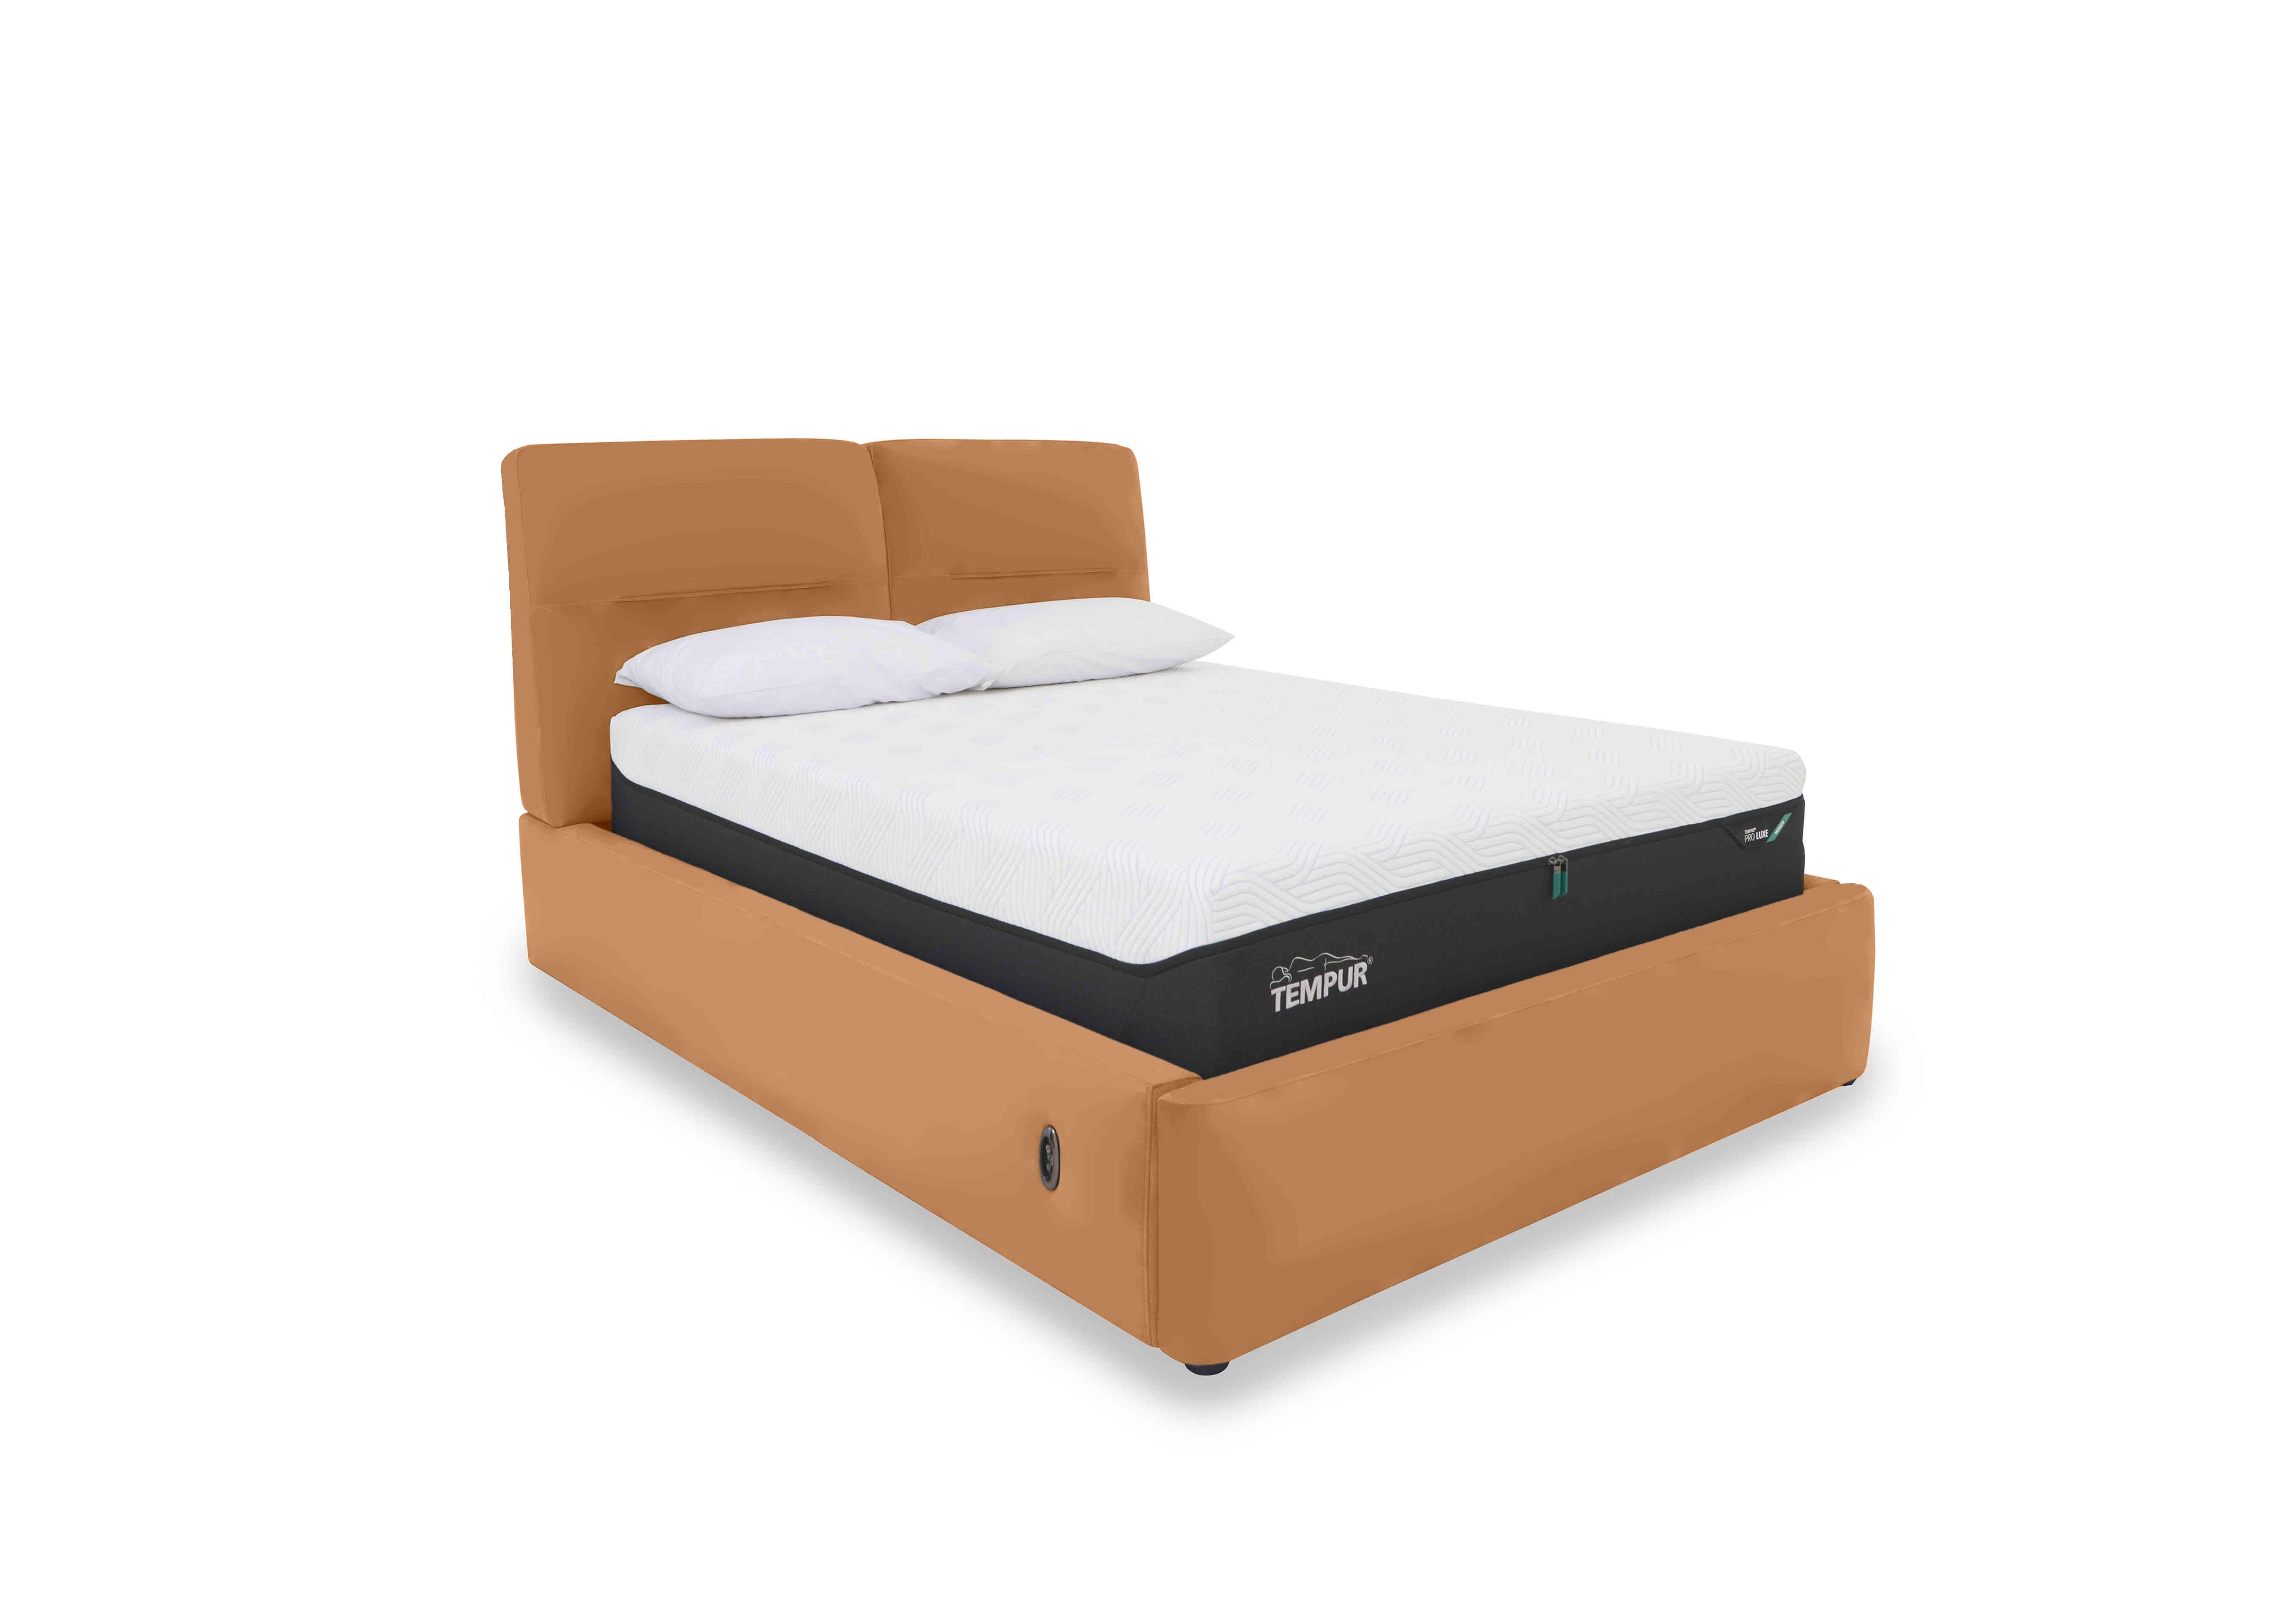 Stark Leather Electric Ottoman Bed Frame in Bv-335e Honey Yellow on Furniture Village